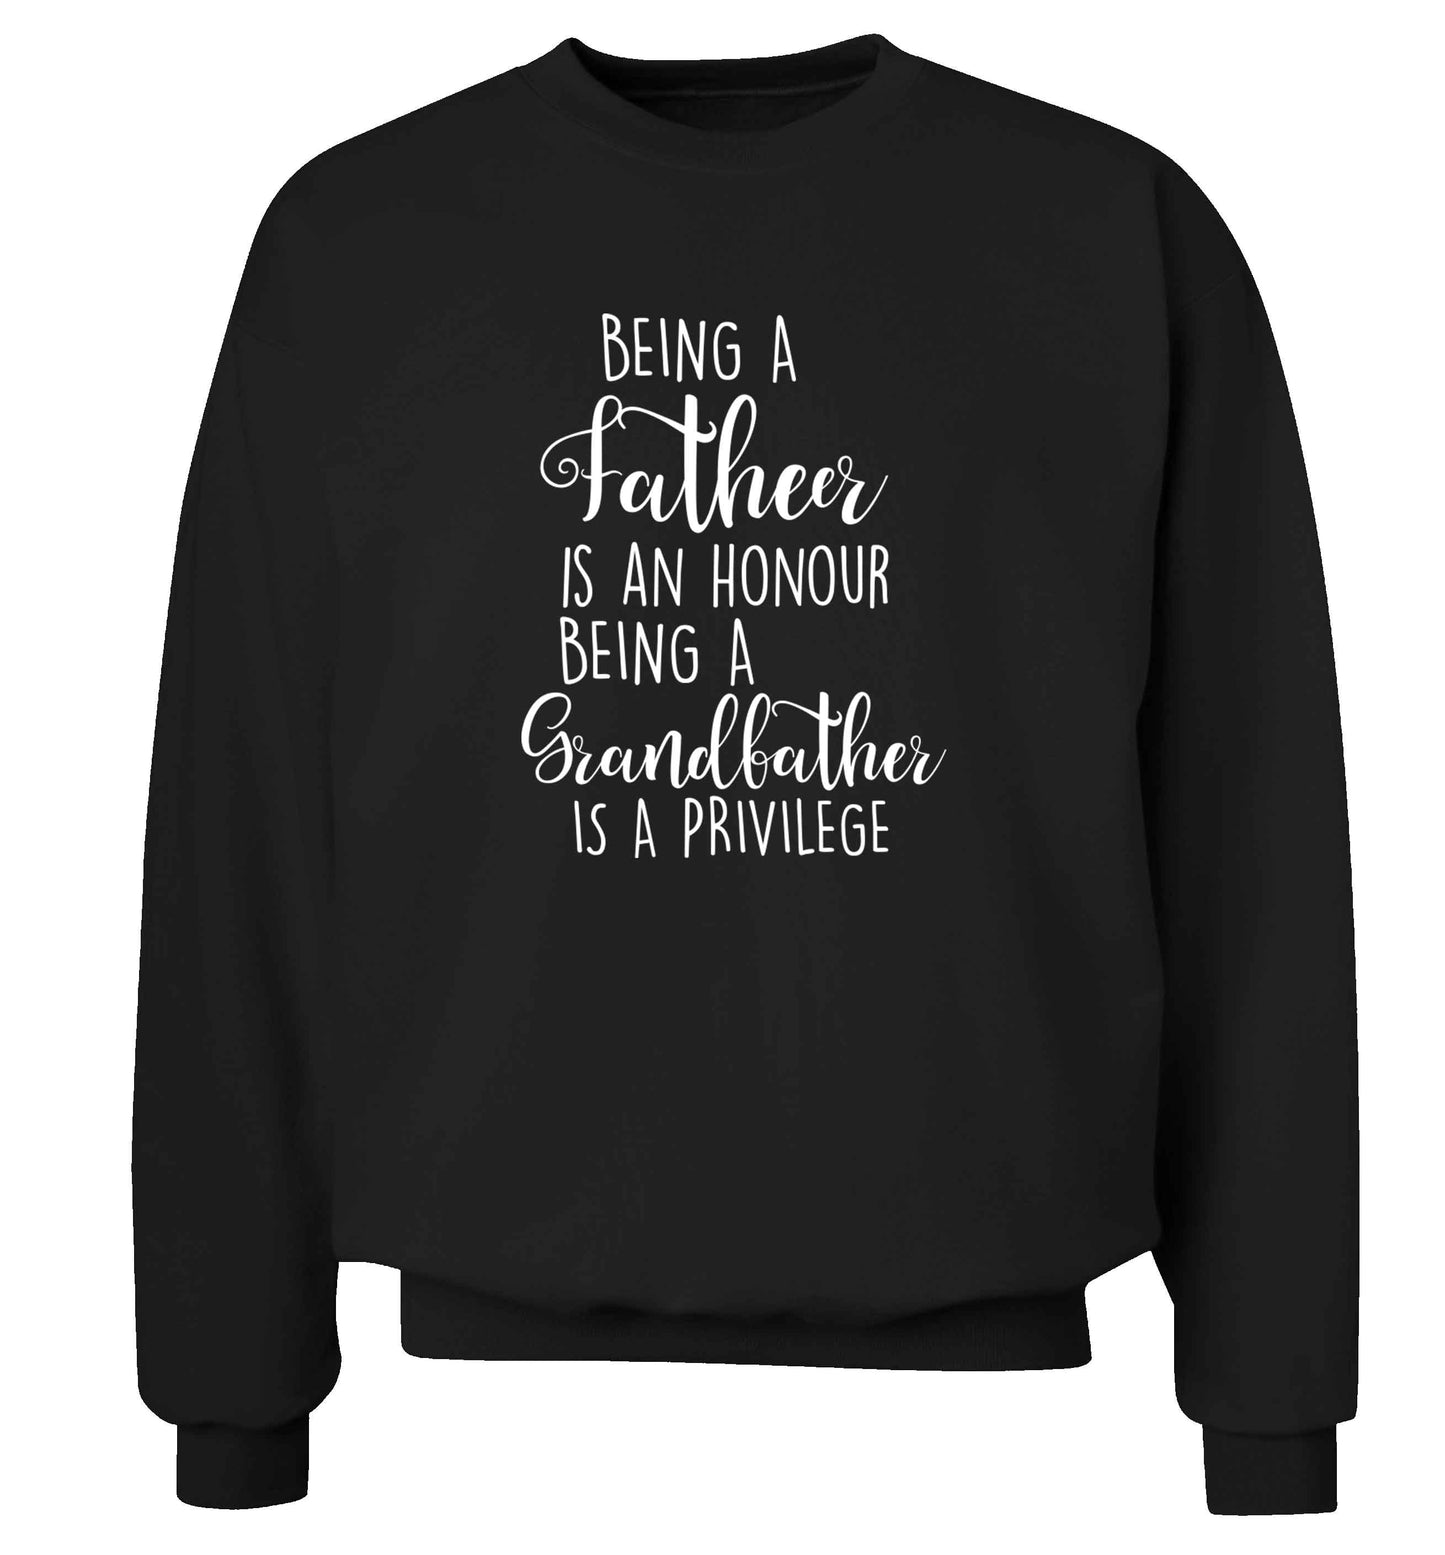 Being a father is an honour being a grandfather is a privilege Adult's unisex black Sweater 2XL